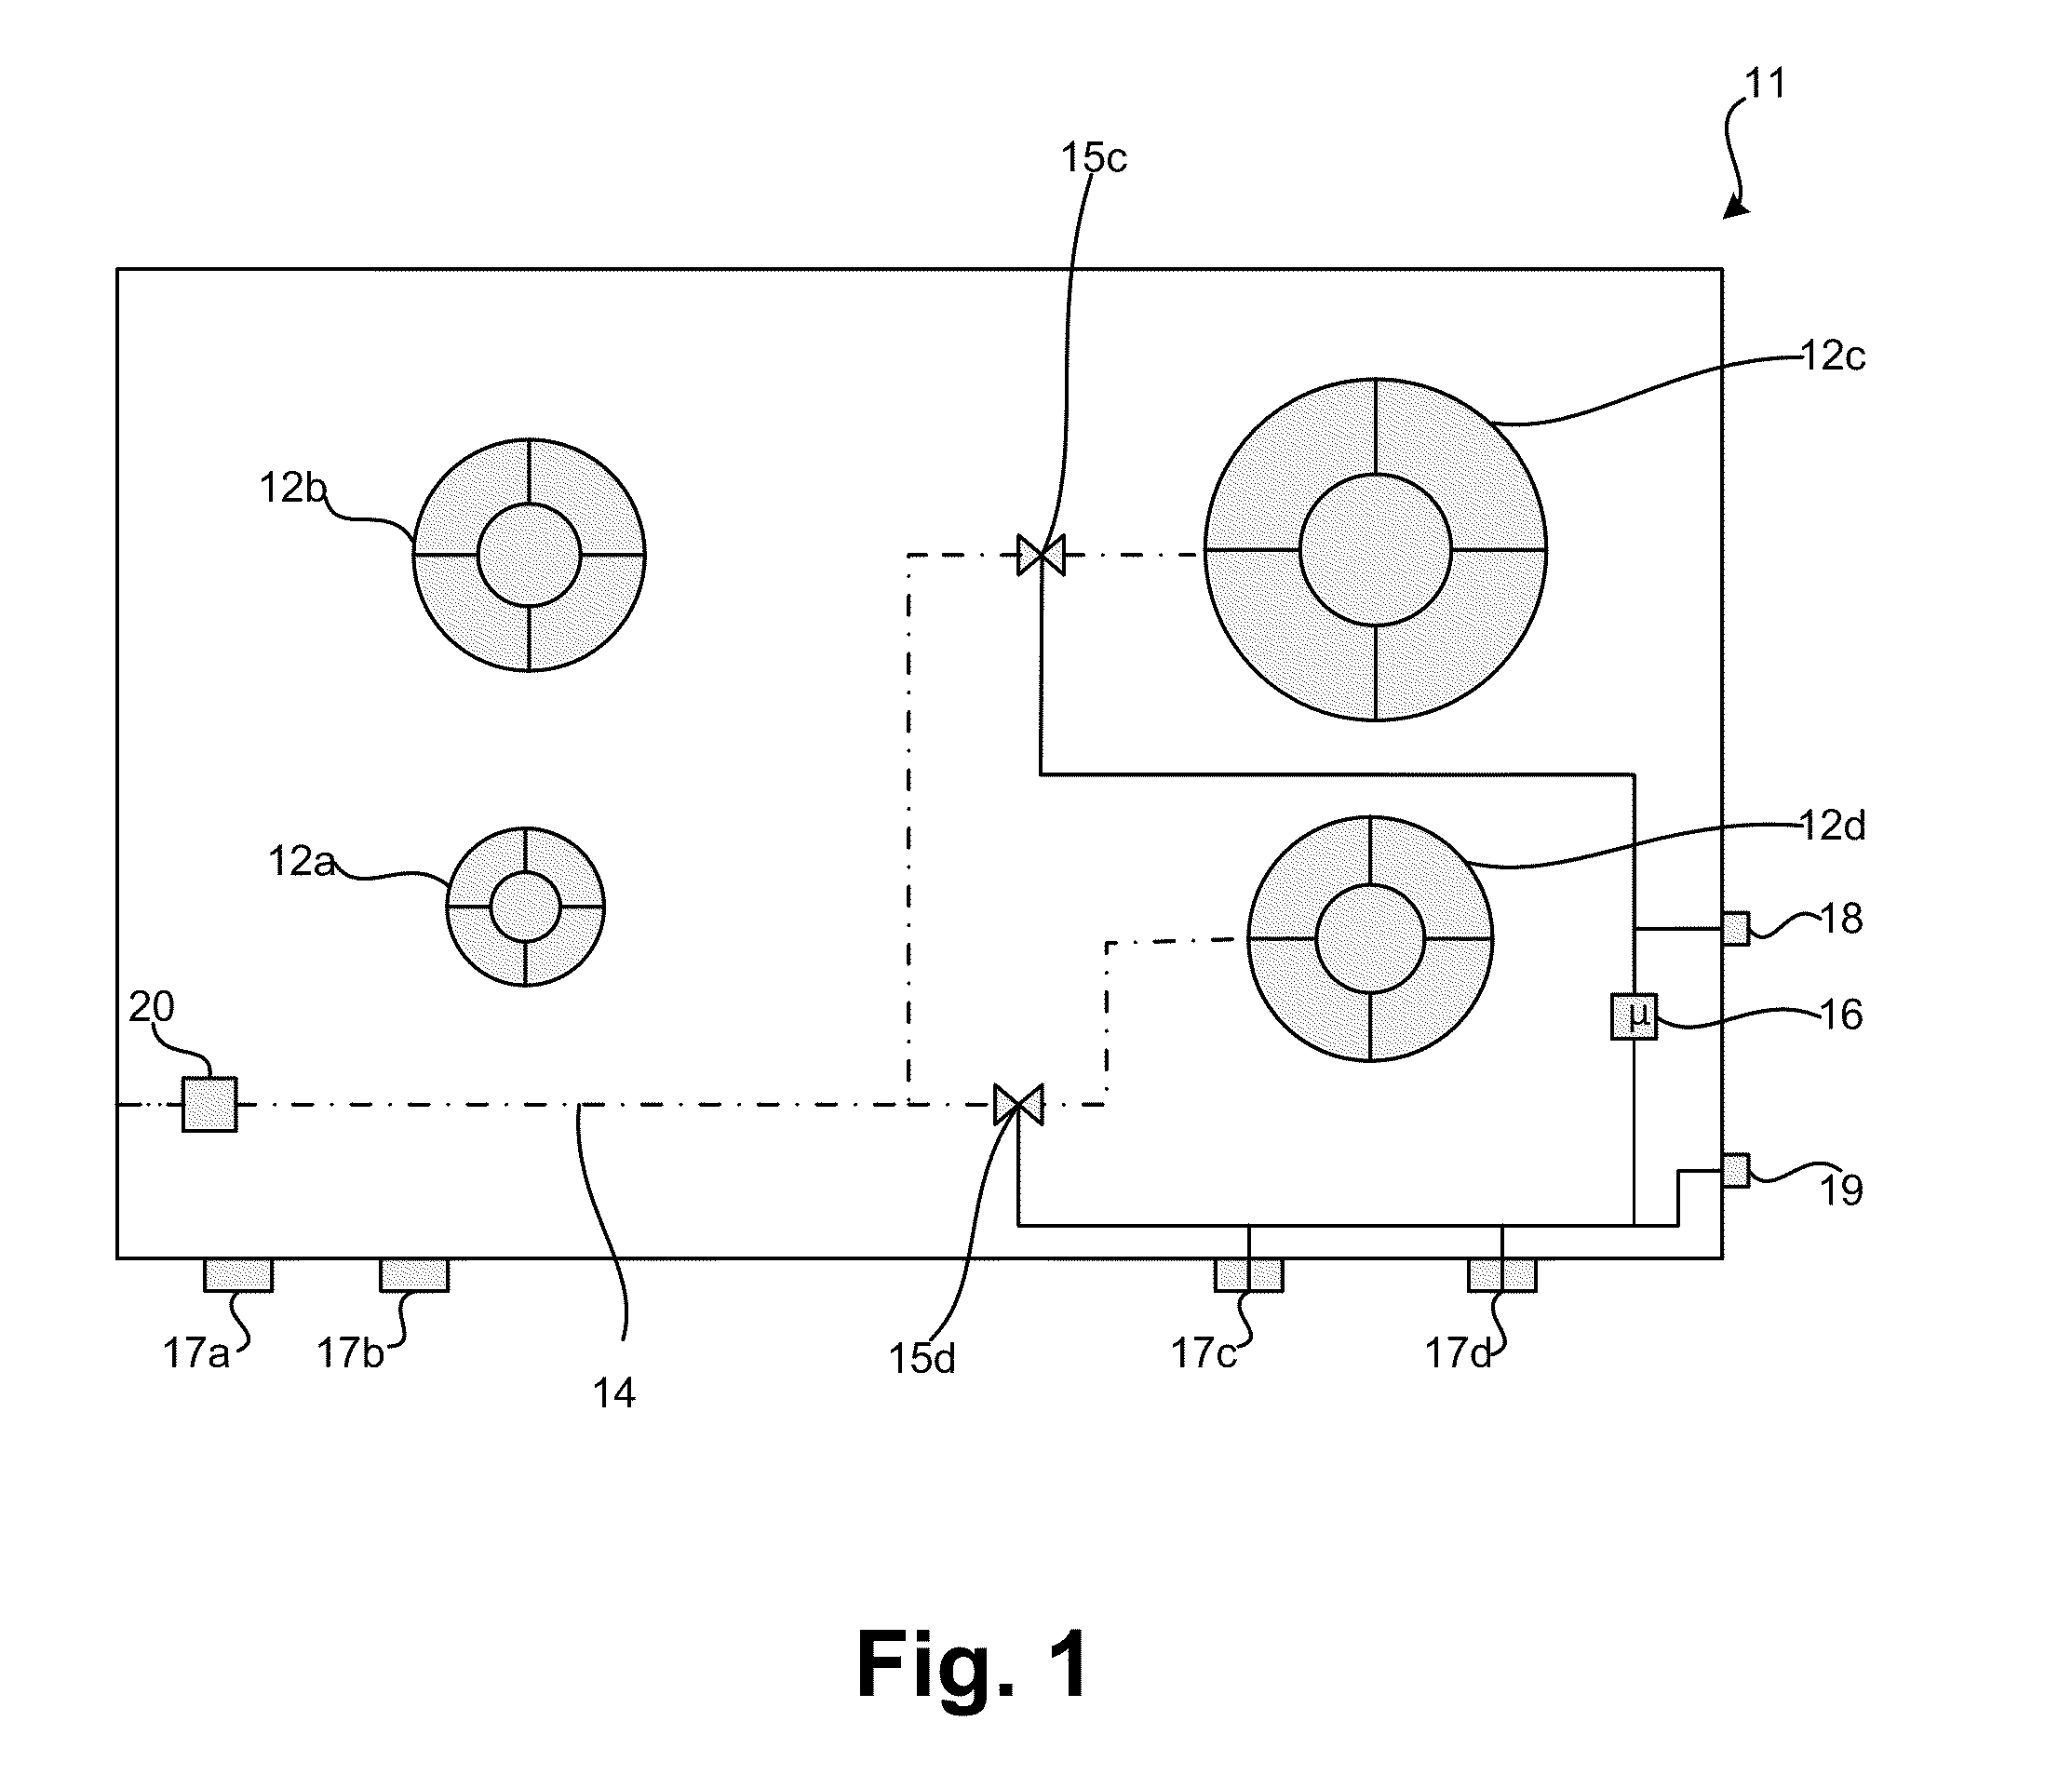 Method for Controlling a Gas Burner and a Hob with Several Gas Burners